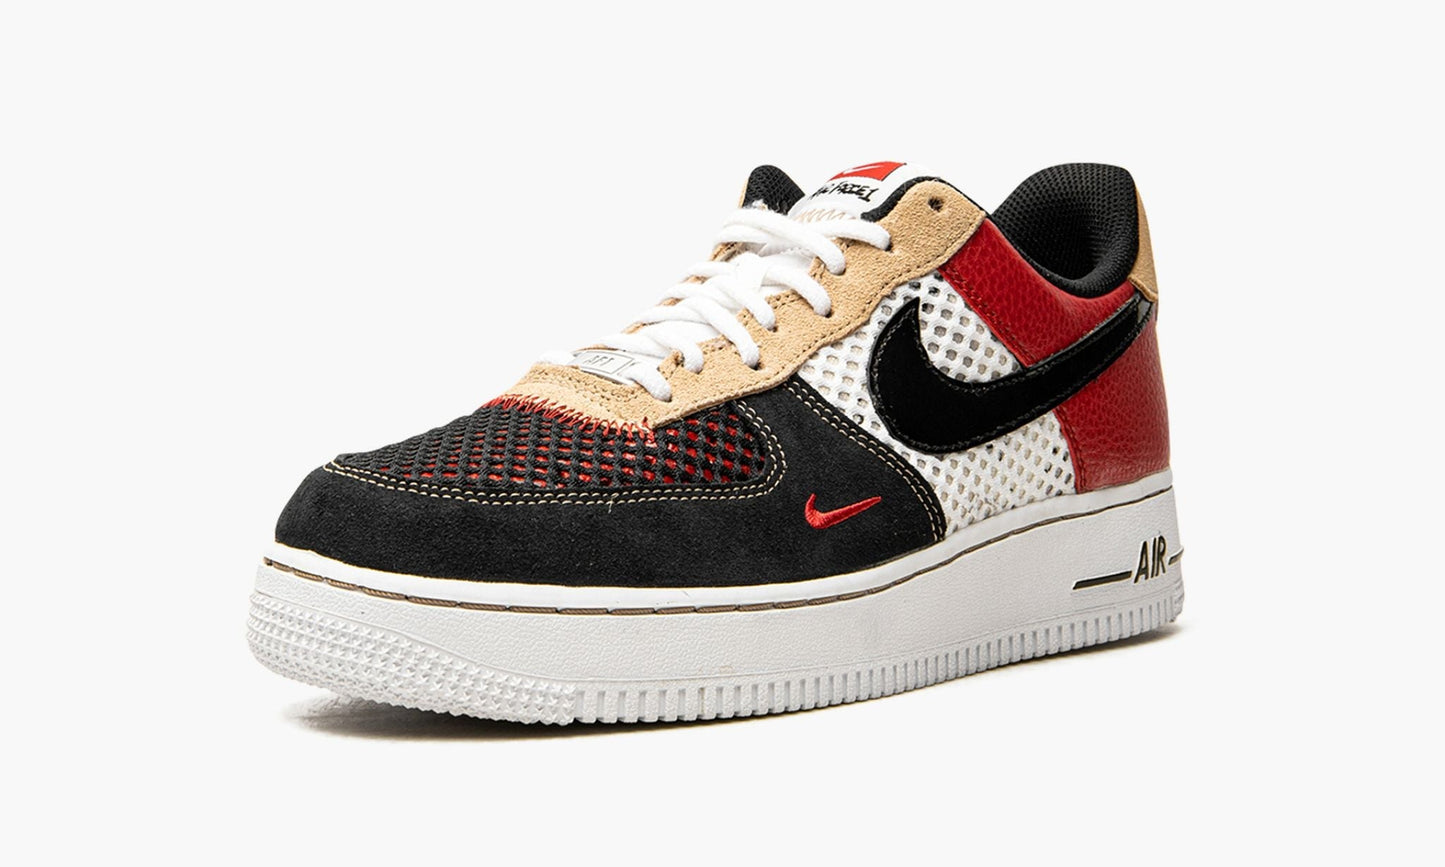 Air Force 1 Low "Alter and Reveal"